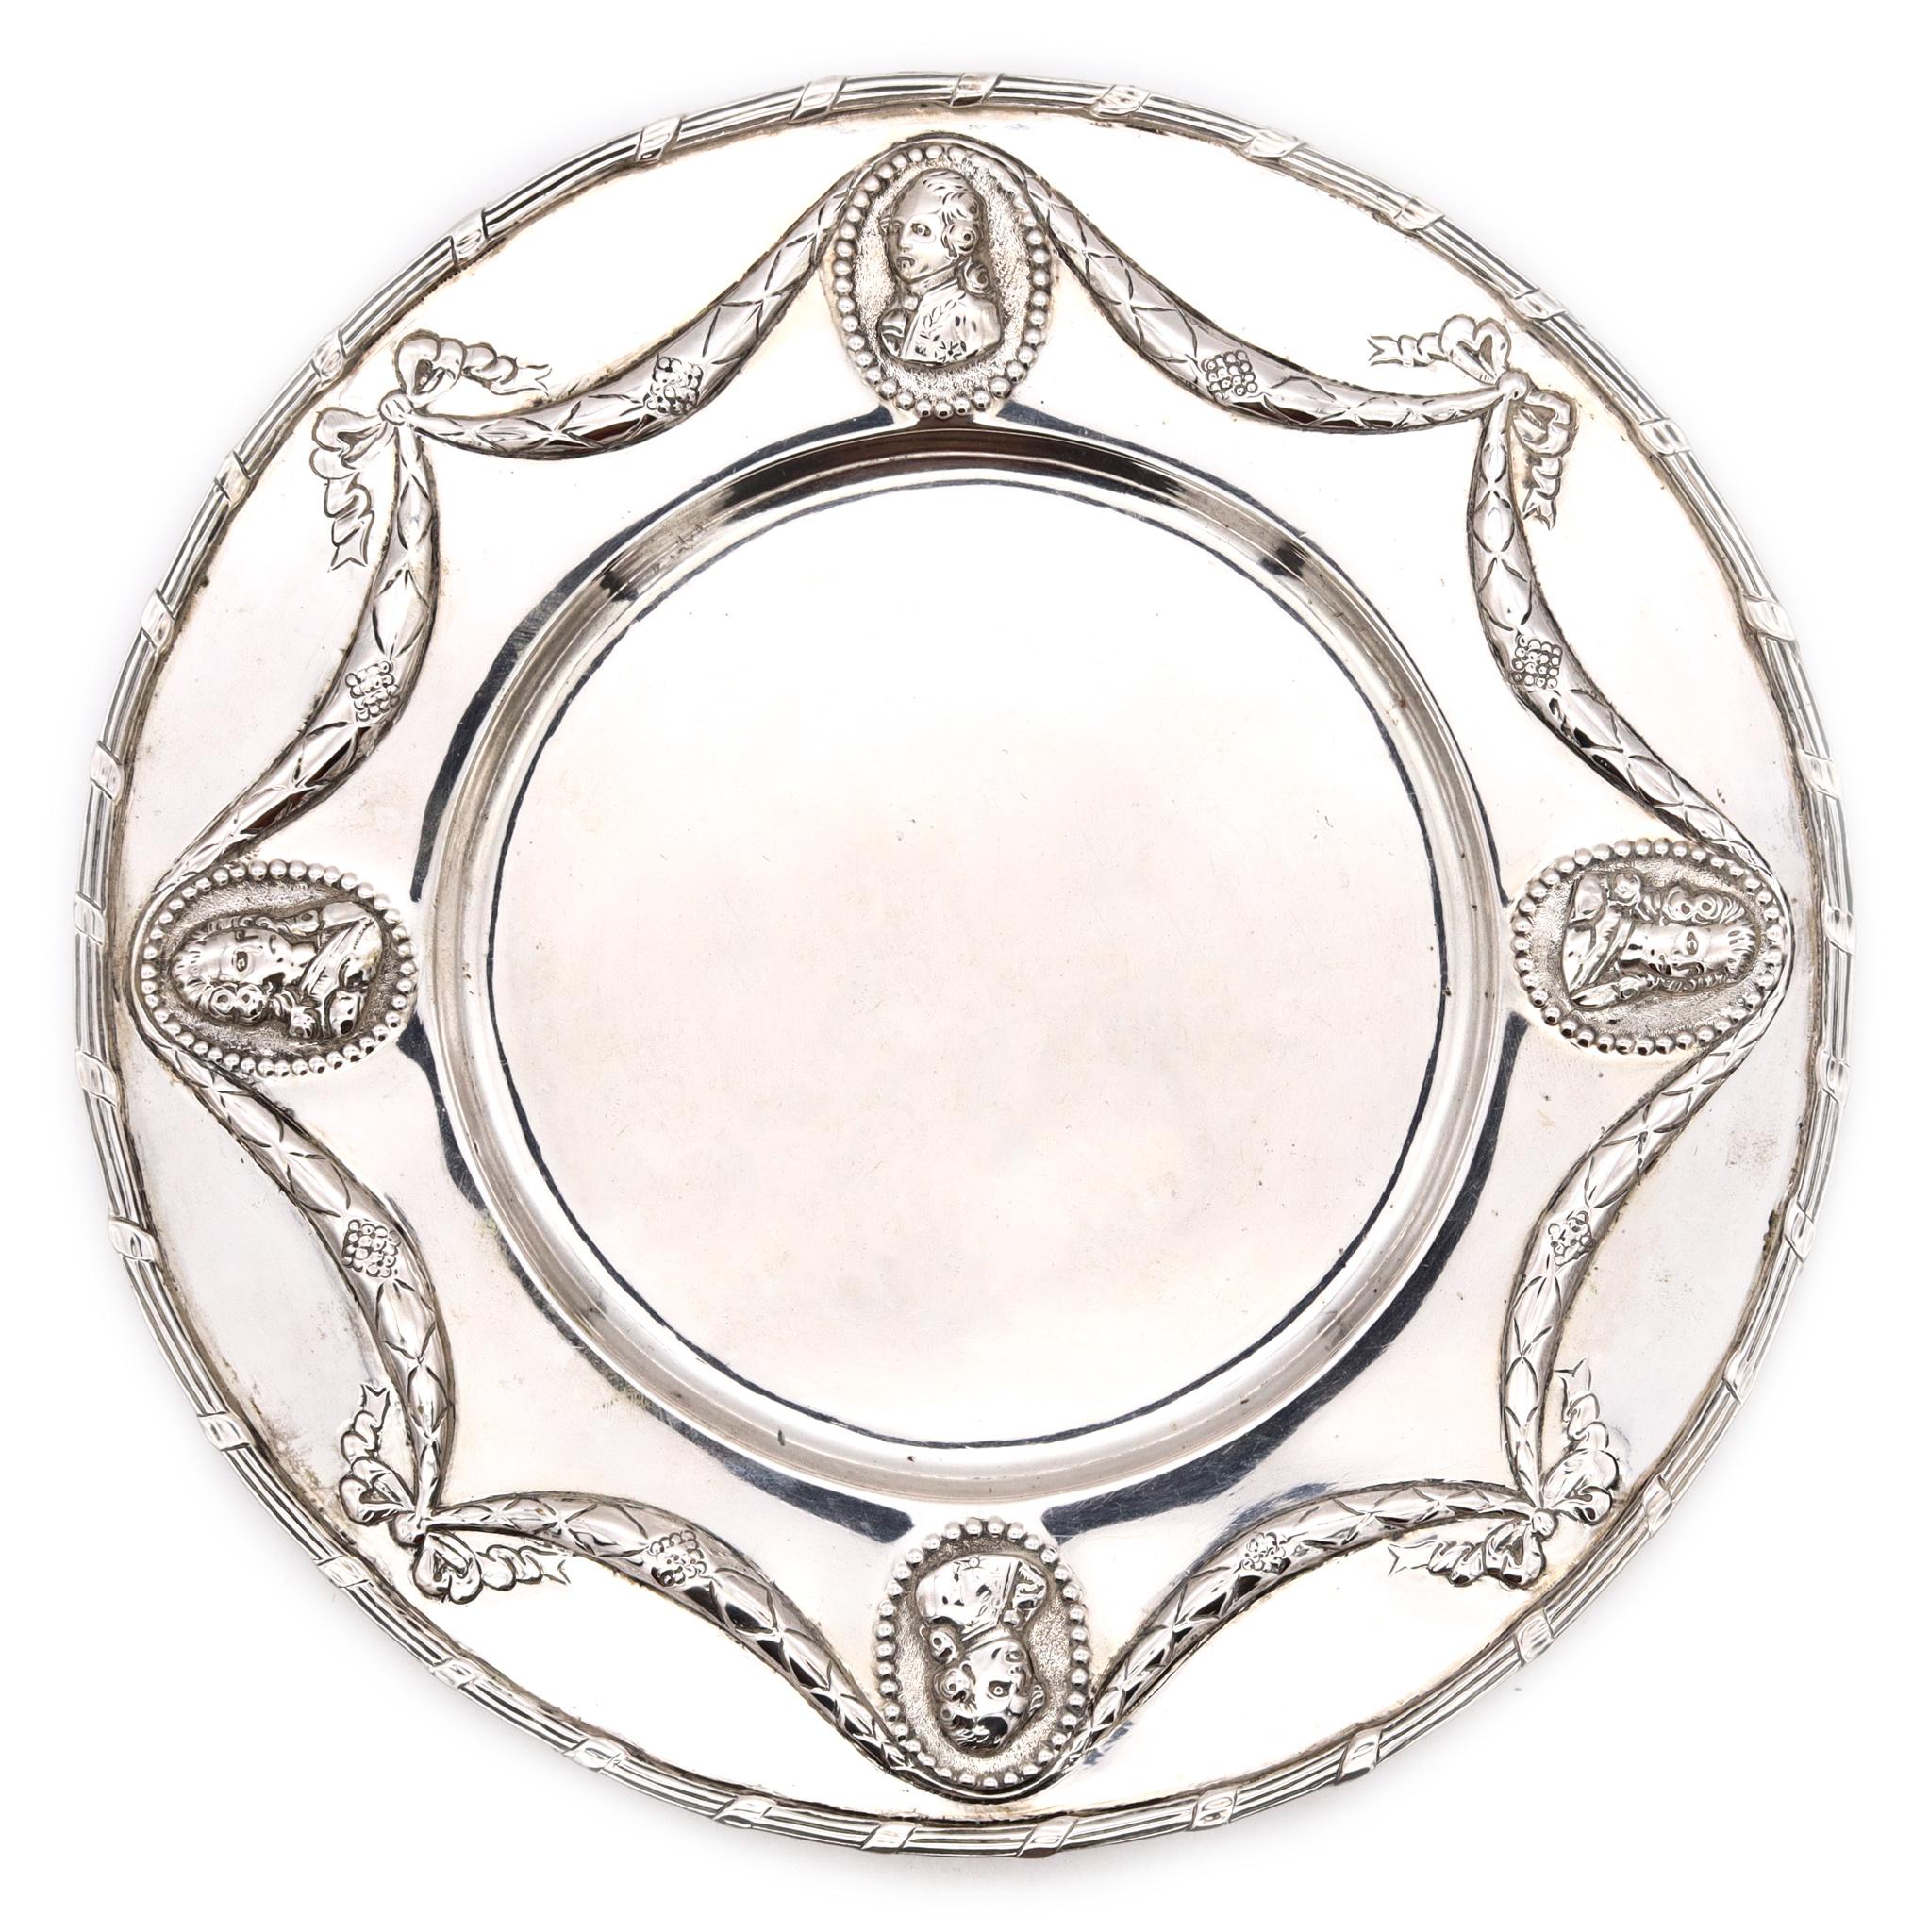 Germany Hanau 1820 Neoclassical Decorative Dish Plate in Solid Sterling Silver For Sale 3